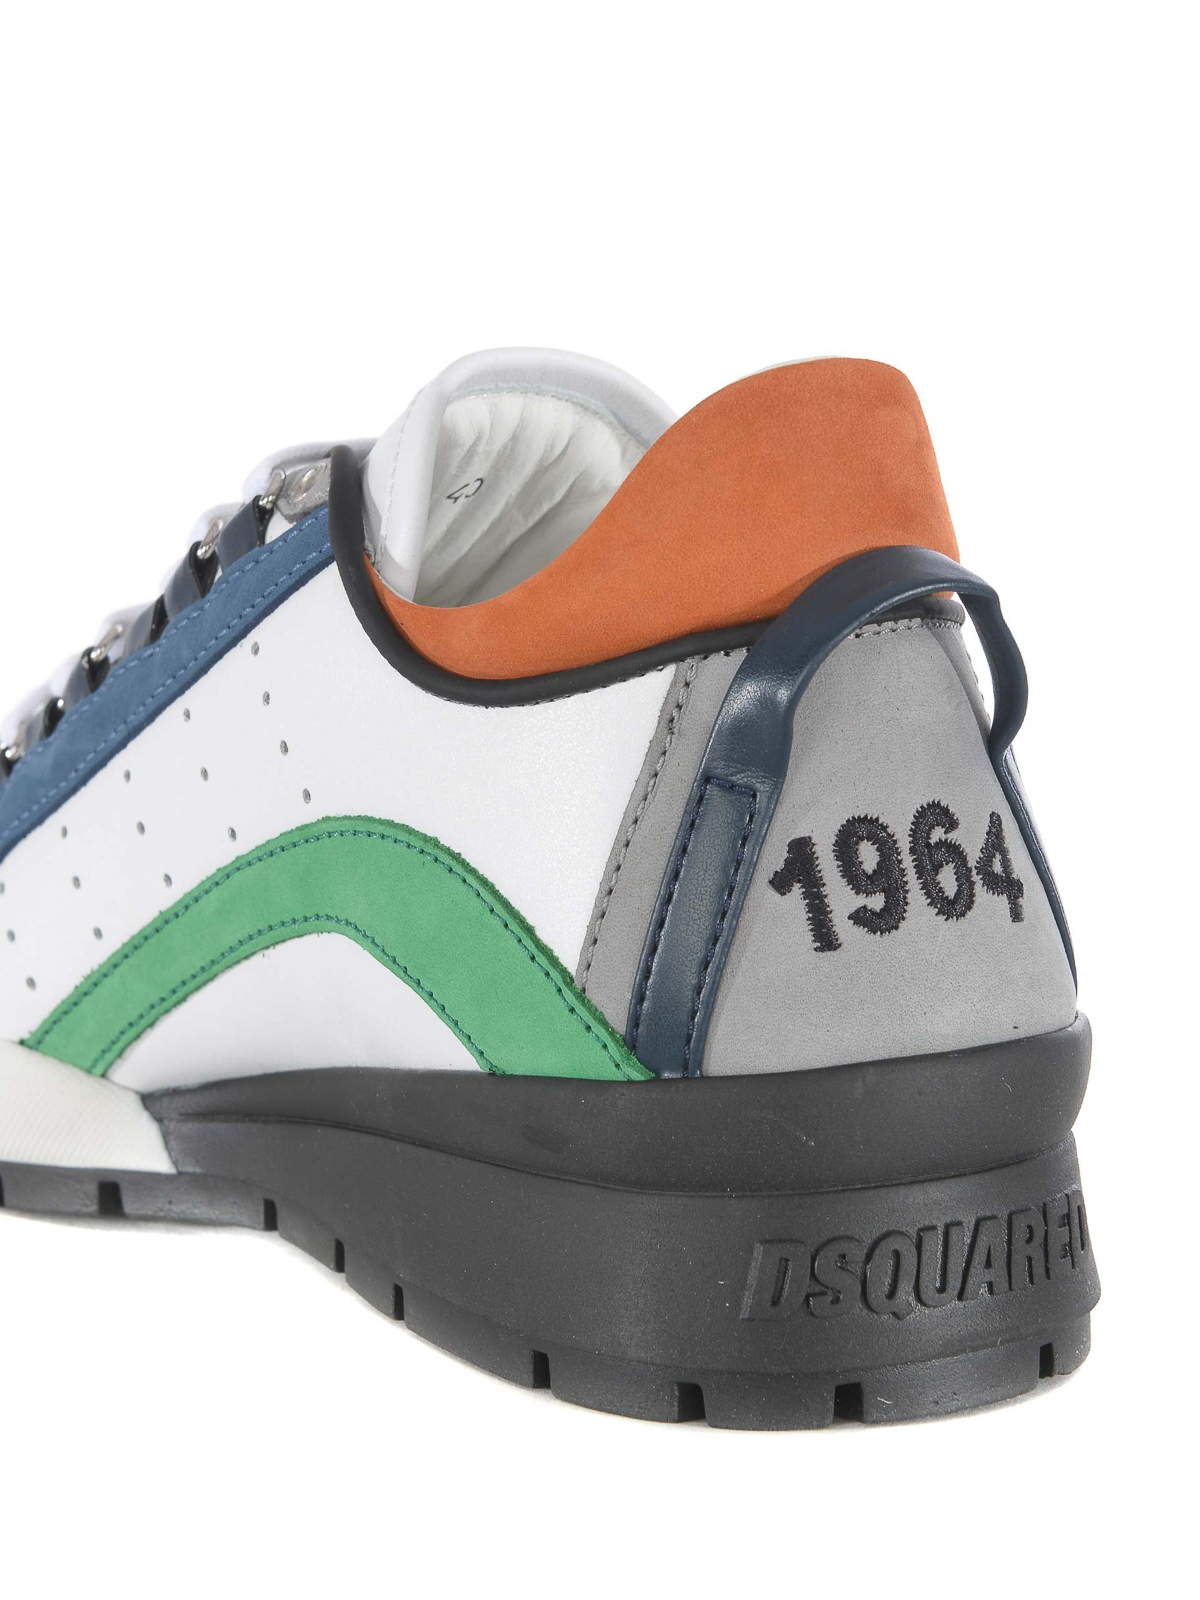 dsquared2 shoes 1964